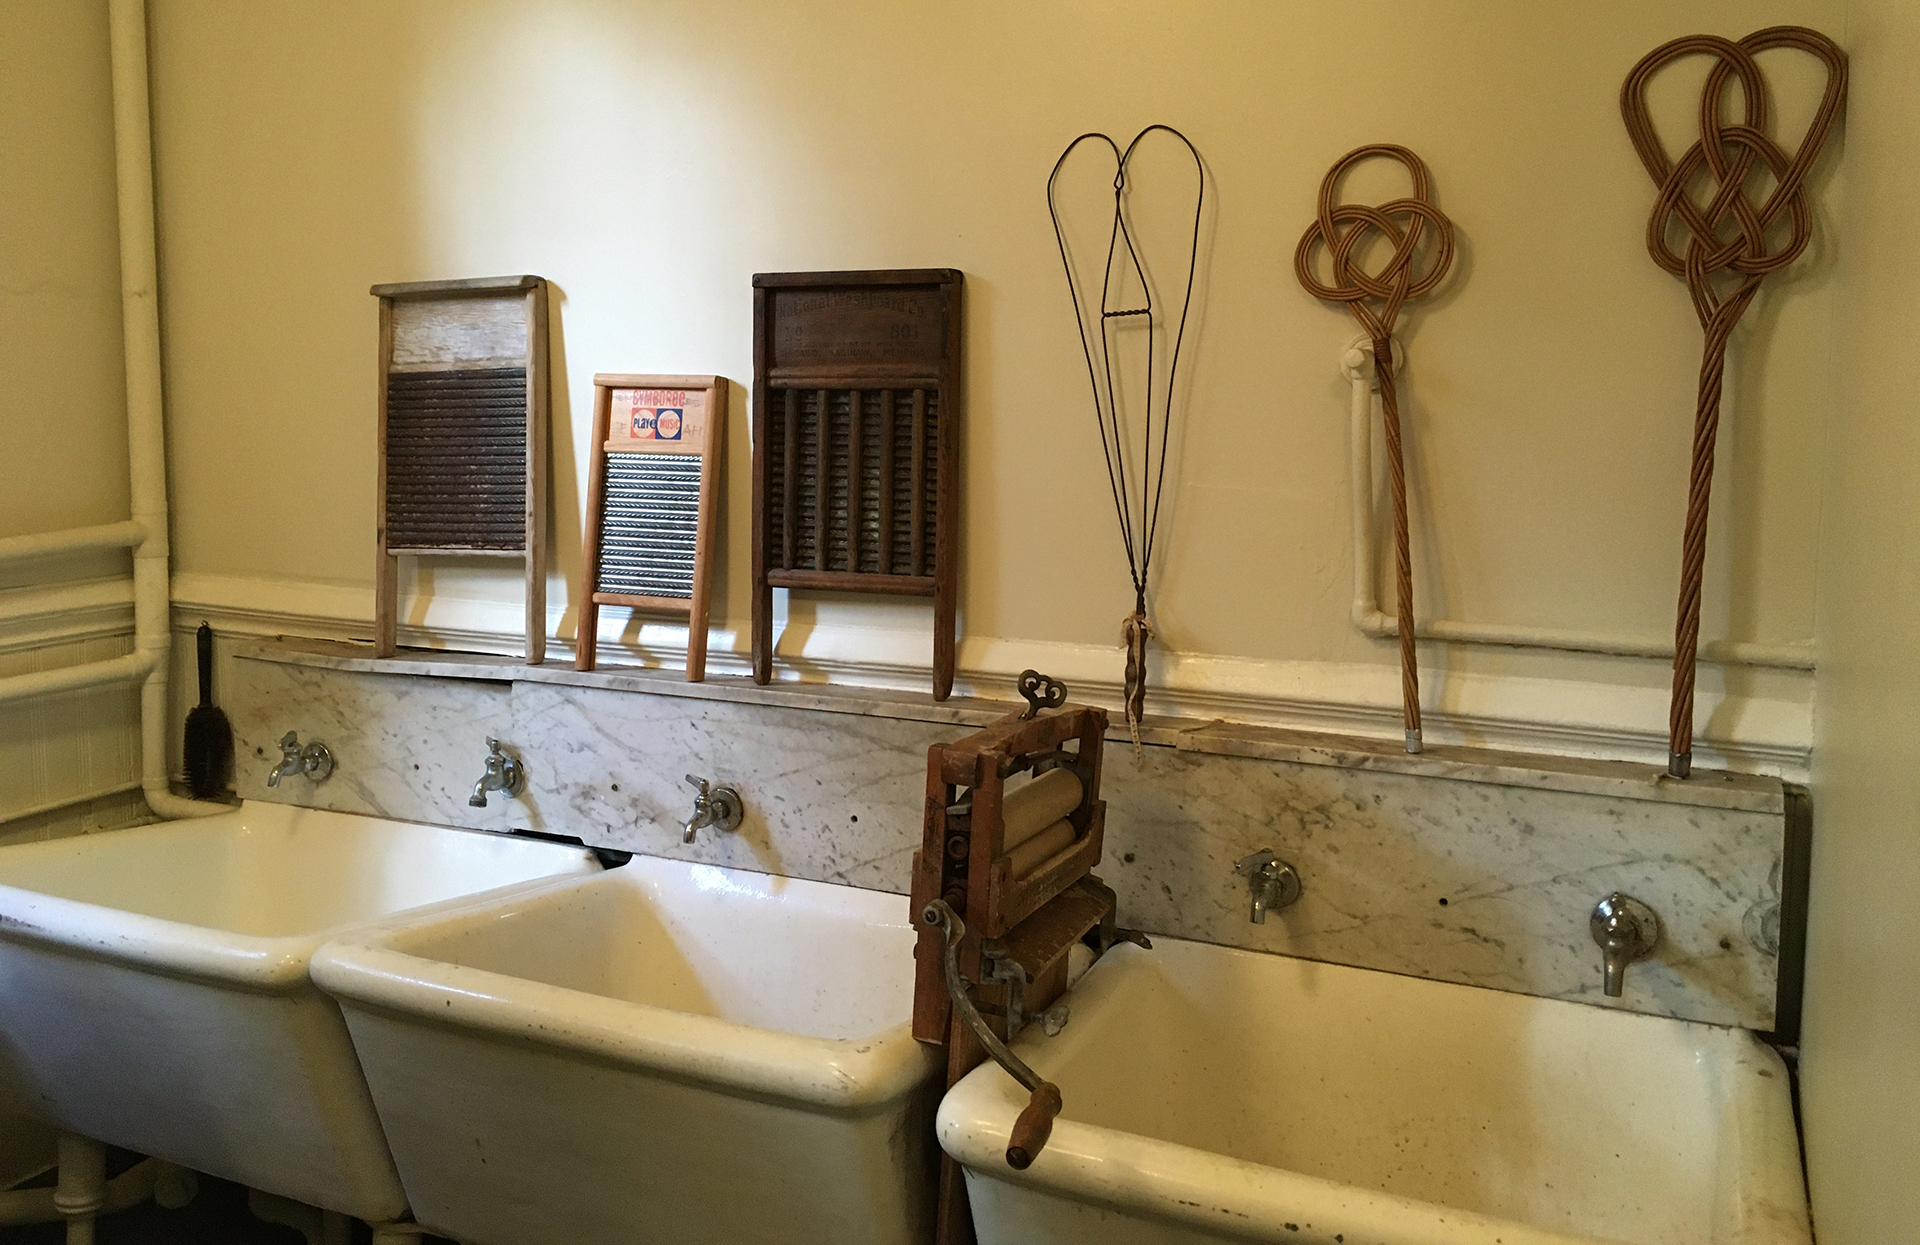 A laundry room in a 1880s Victorian house. It includes three wash basins, a wringer and a washboard.